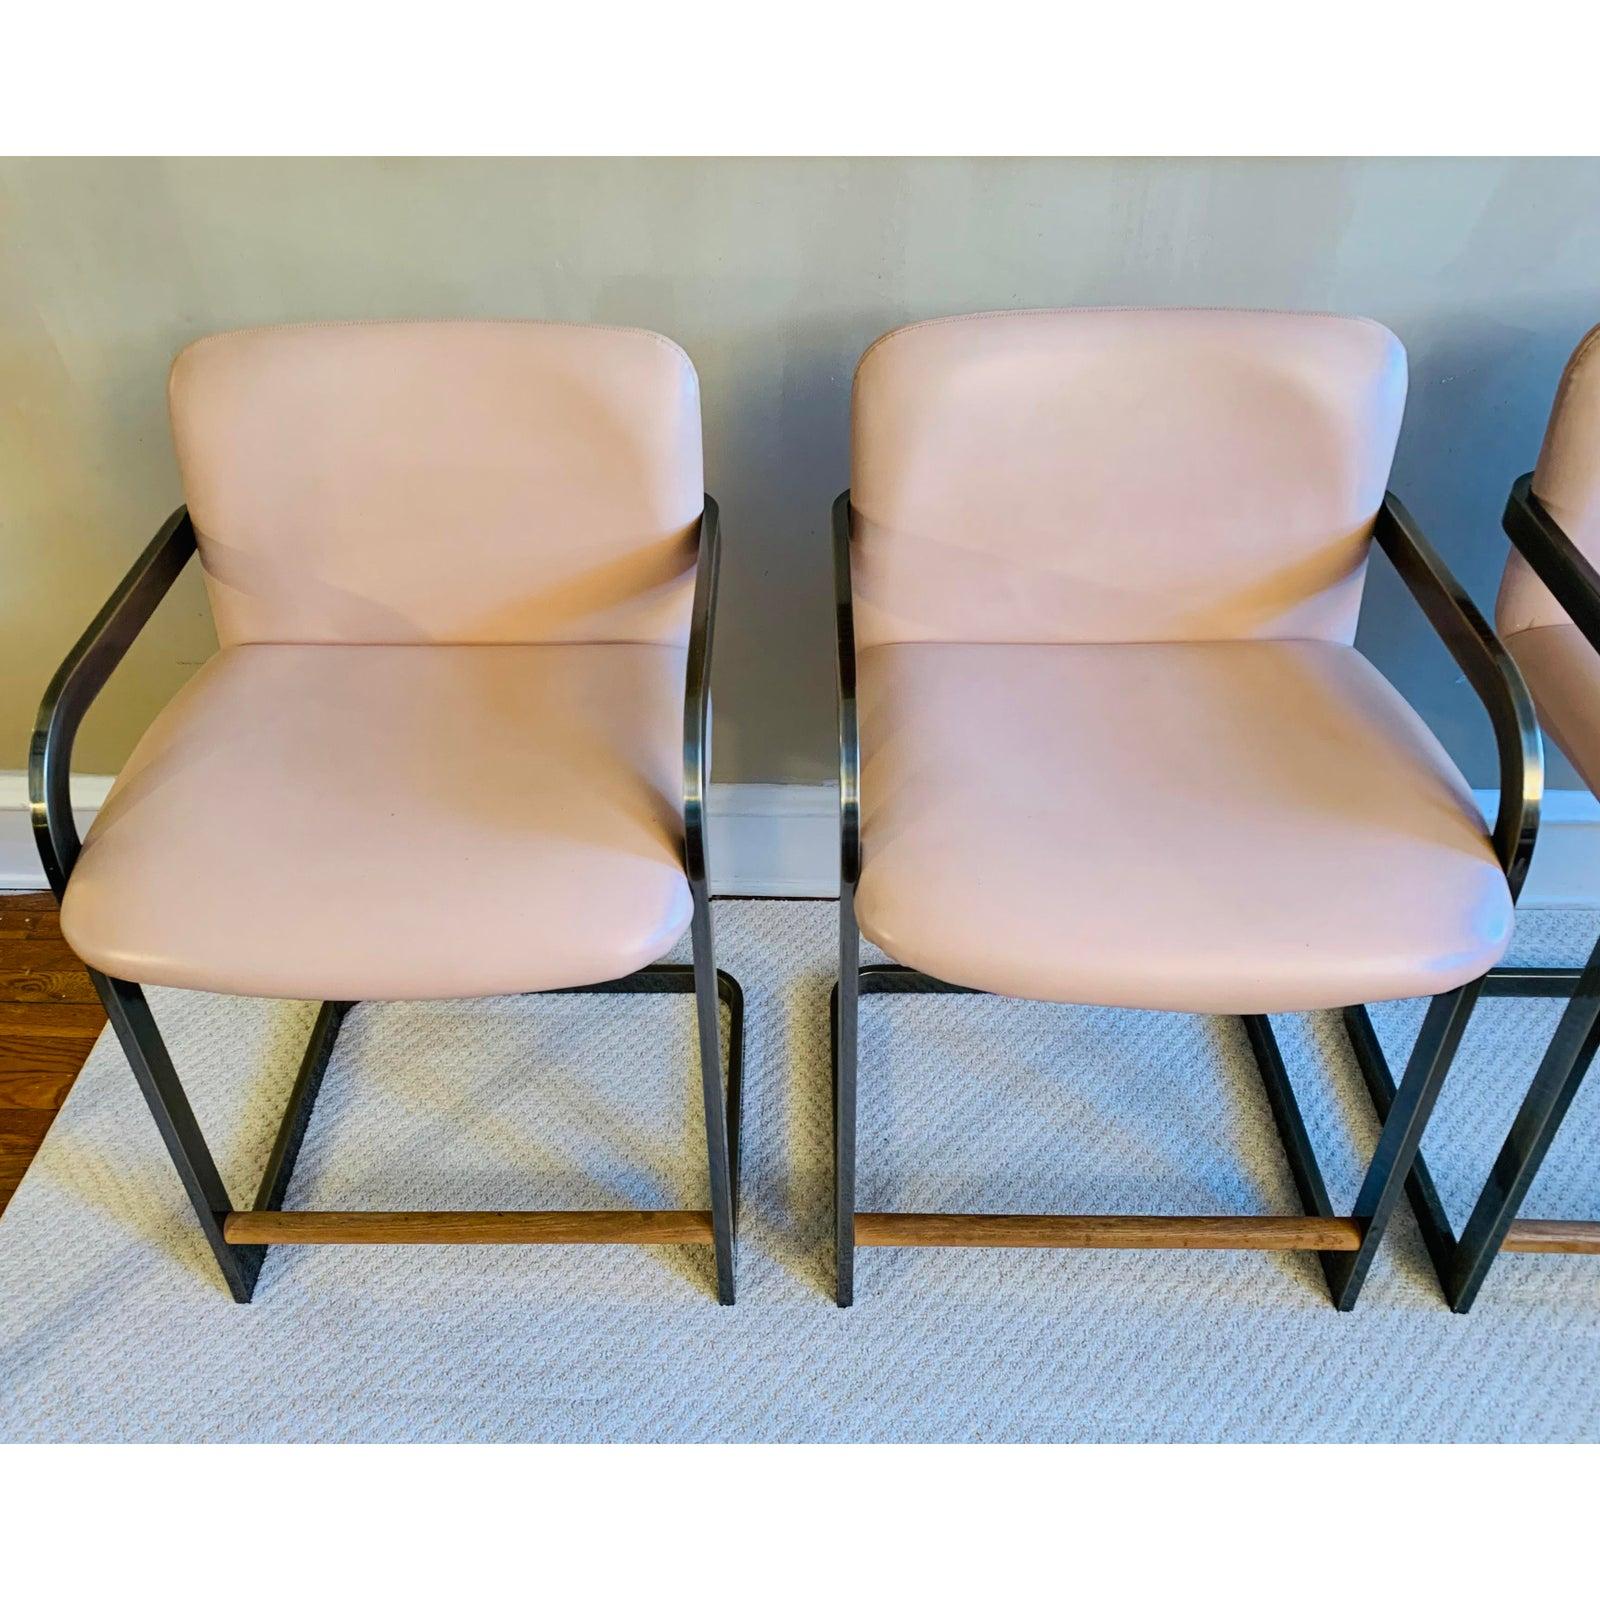 North American Vintage Midcentury Cantilever Stools in the Milo Baughman Style by D.I.A. 1980's